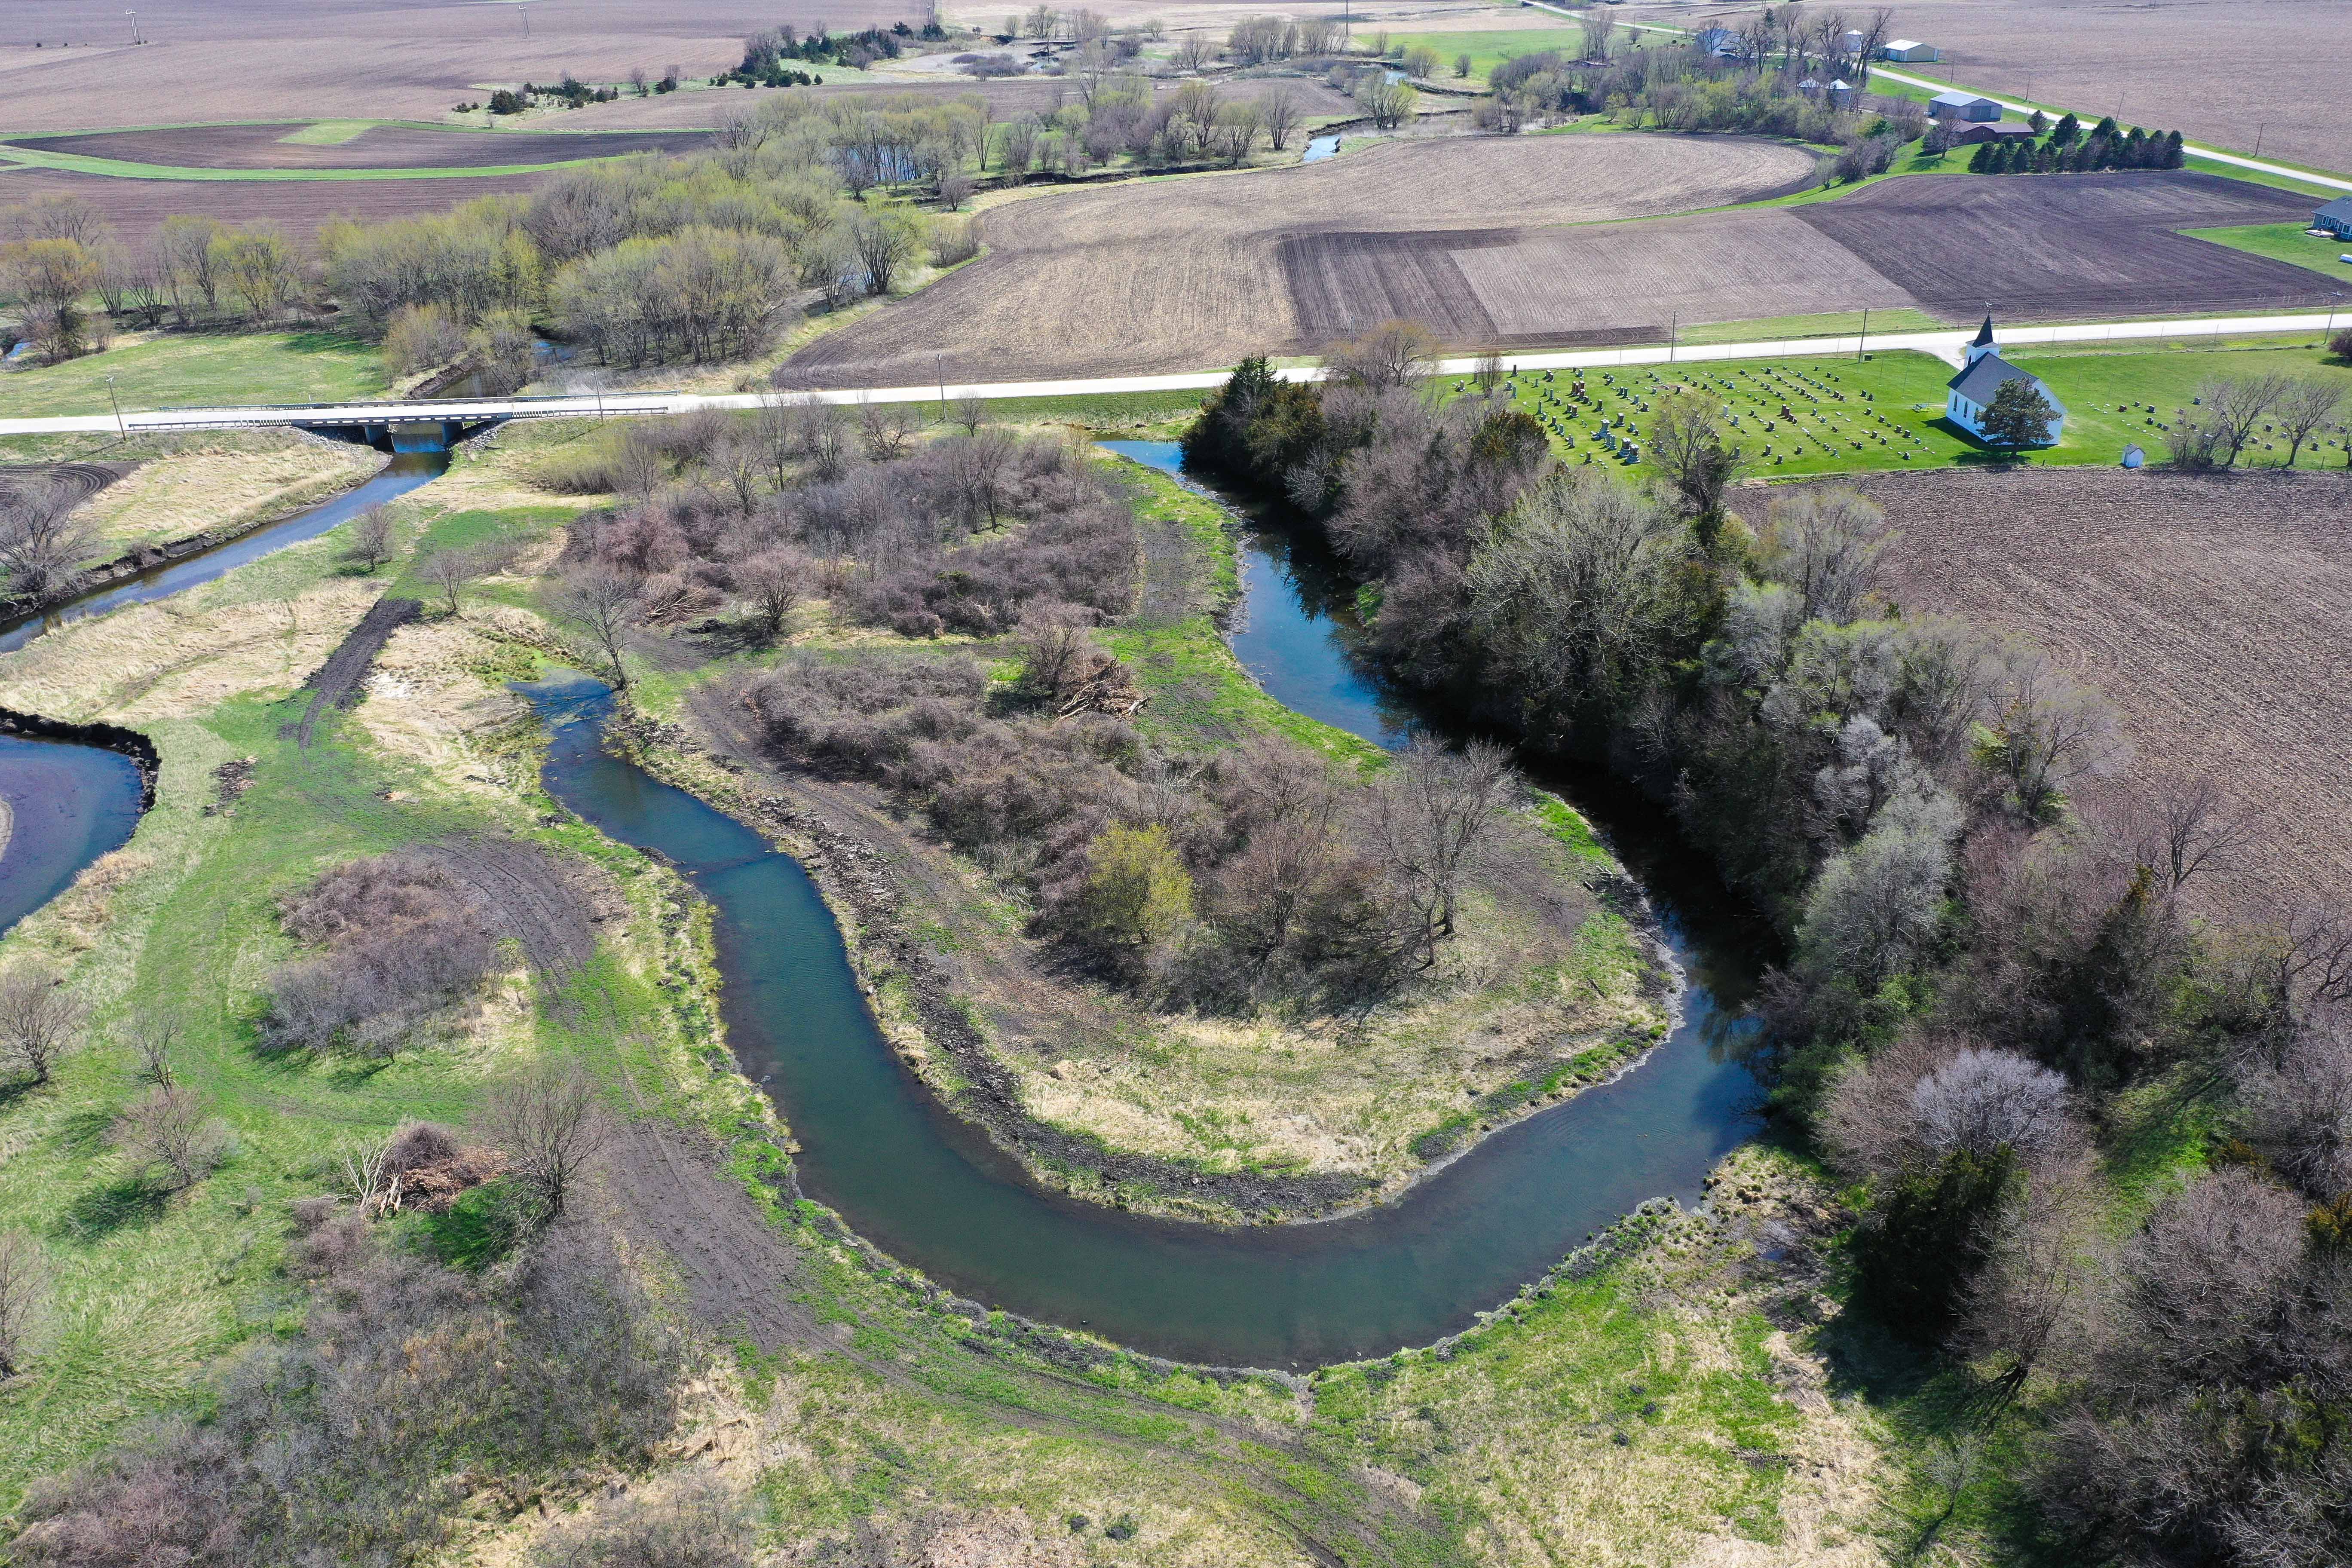 Restored oxbow near a river, surrounded by fields